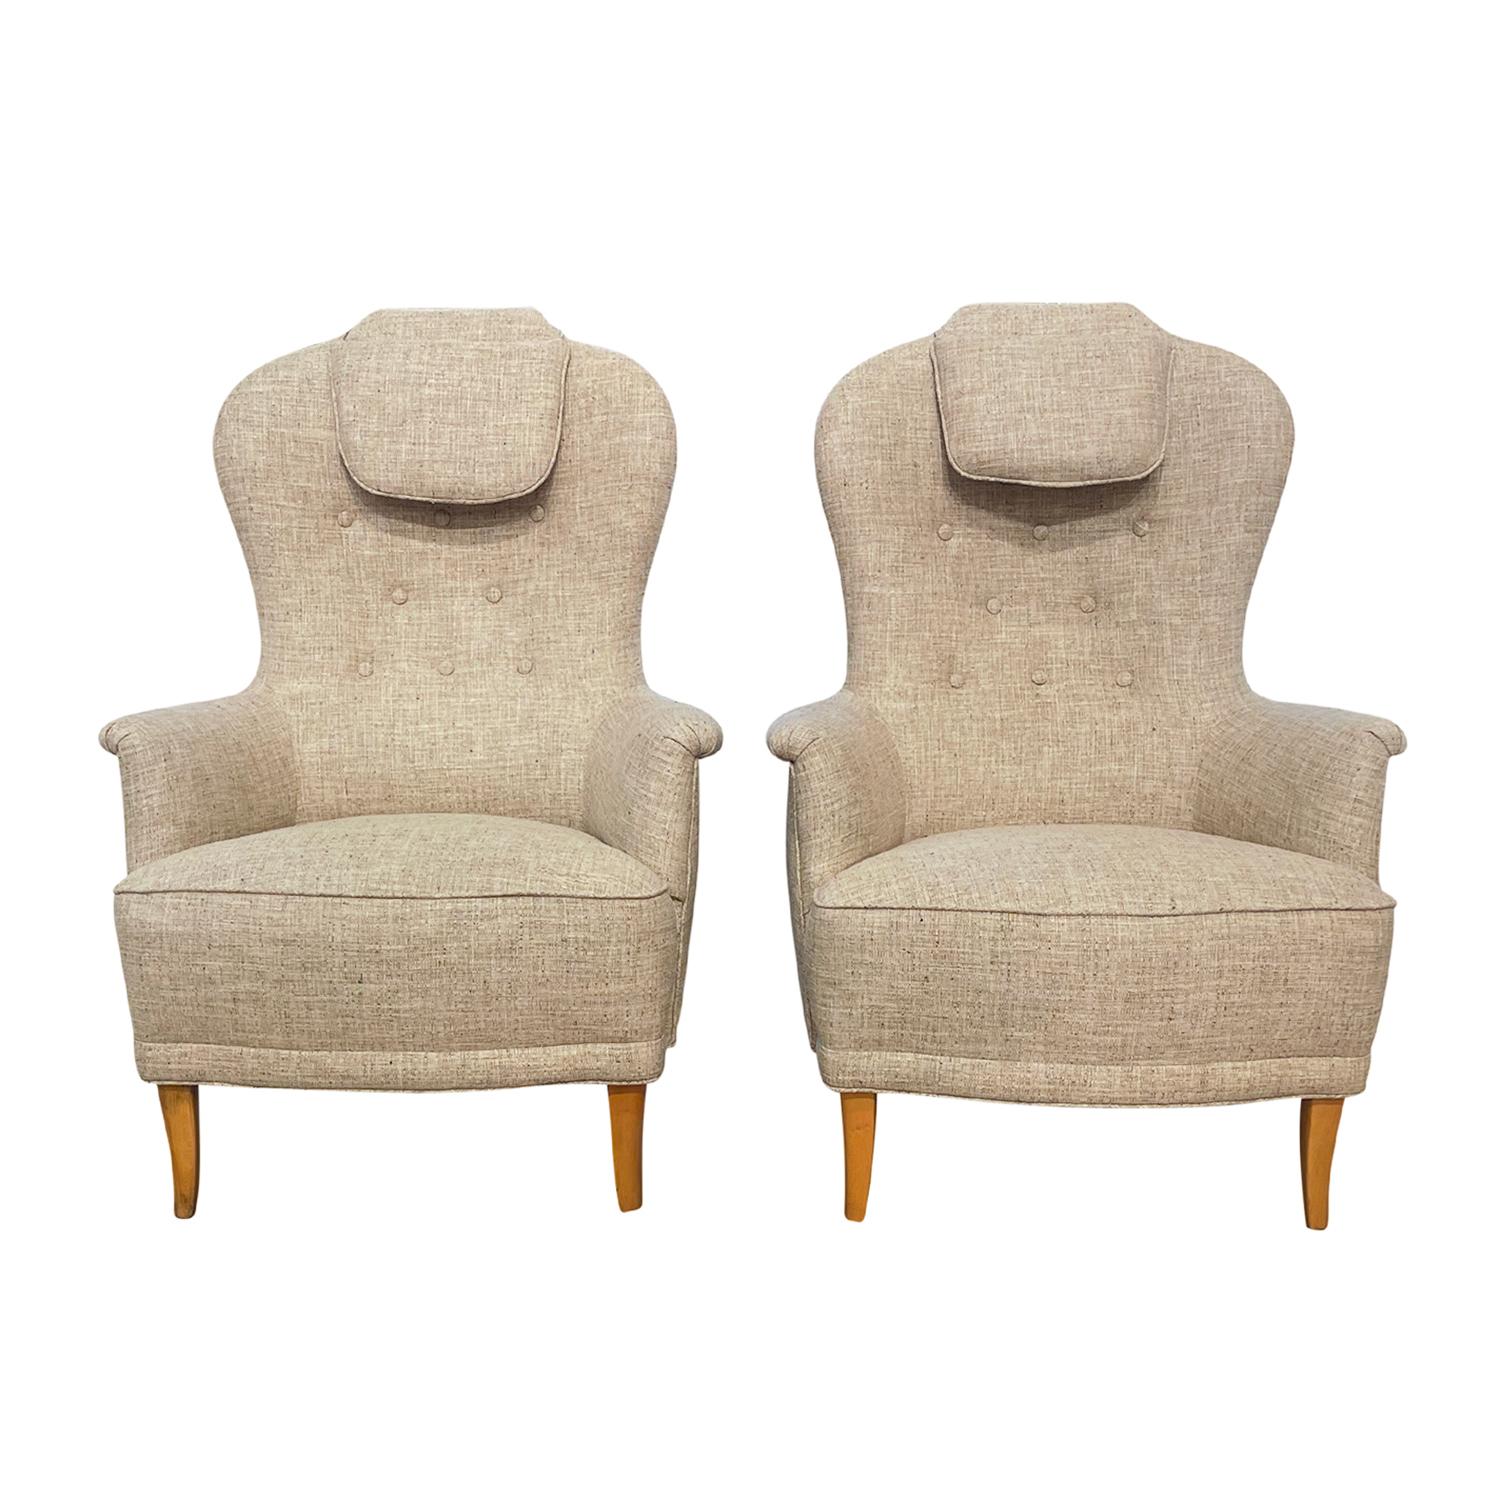 A vintage Mid-Century modern Swedish Grandma pair of armchairs designed by Carl Malmsten and produced by O.H. Sjögren, in good condition. The backrests of the Scandinavian lounge chairs are slightly inclined with a button-tufted back detailed with